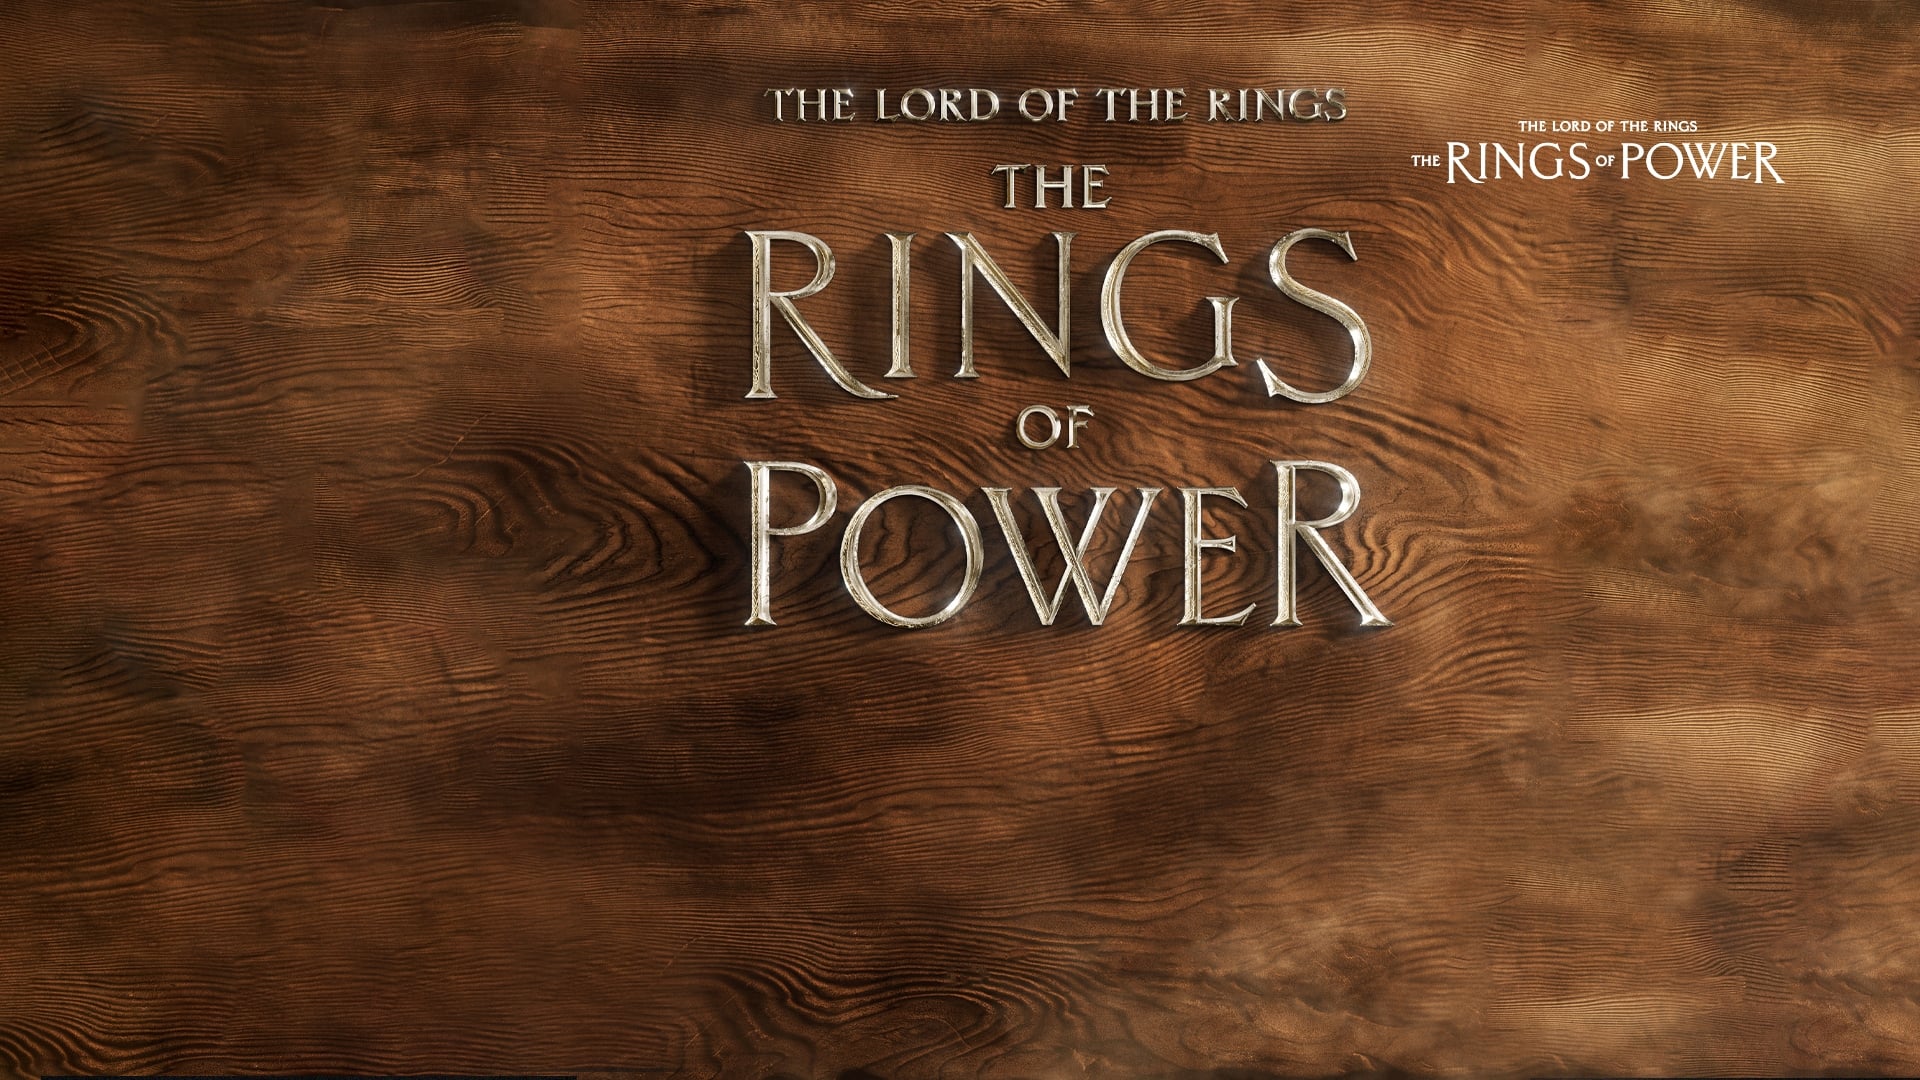 The Lord of the Rings: The Rings of Power - Season 1 Episode 3